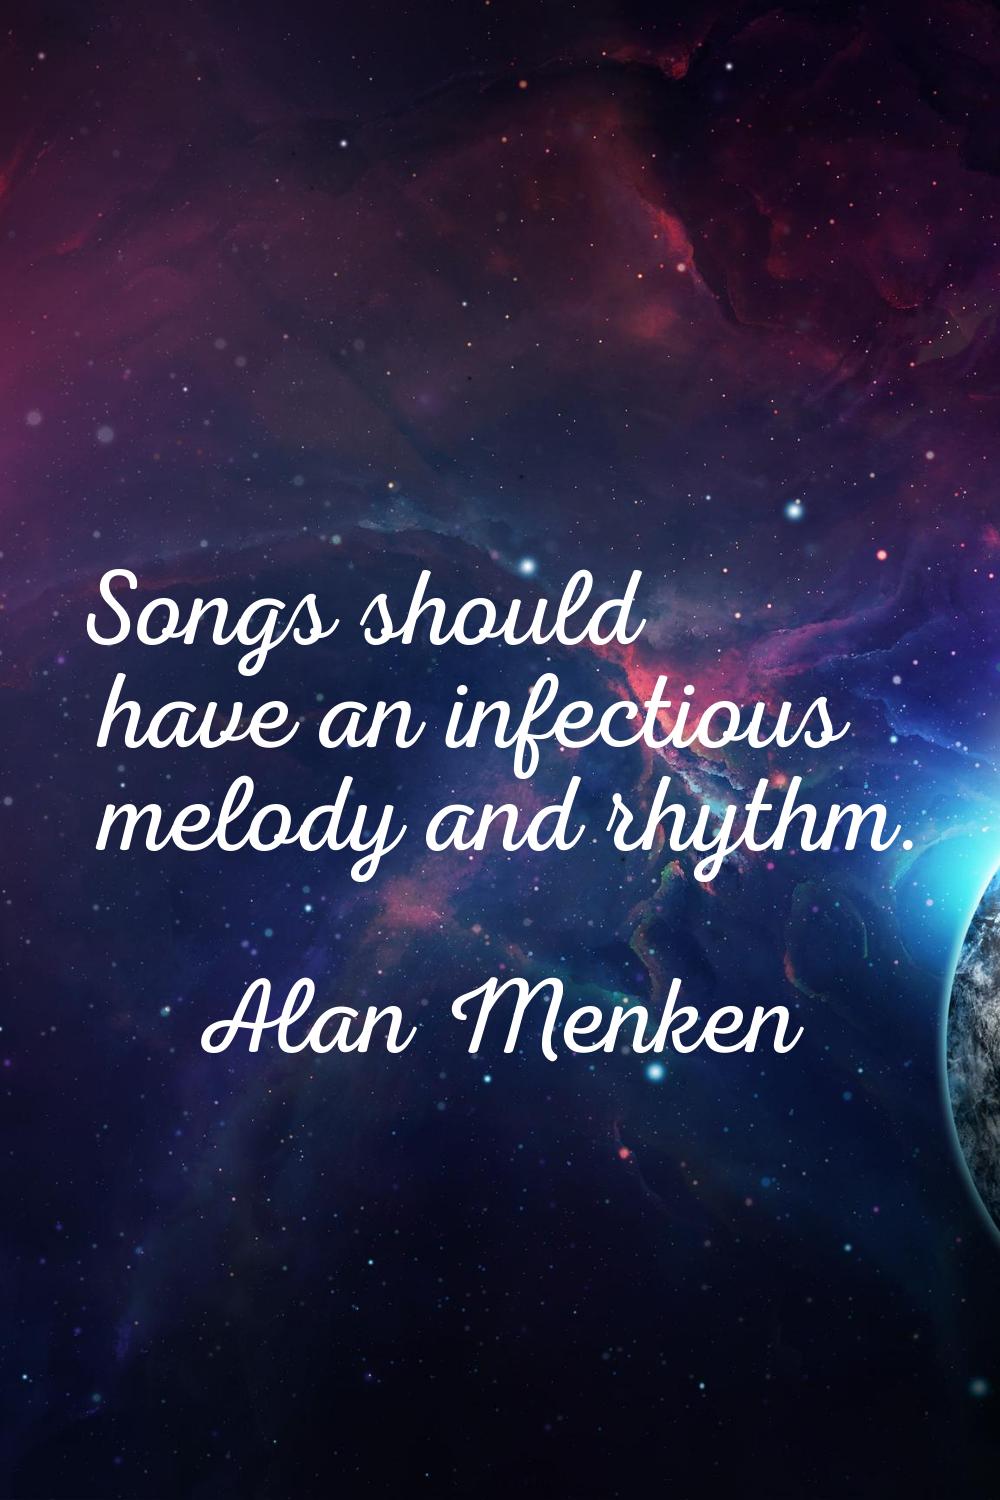 Songs should have an infectious melody and rhythm.